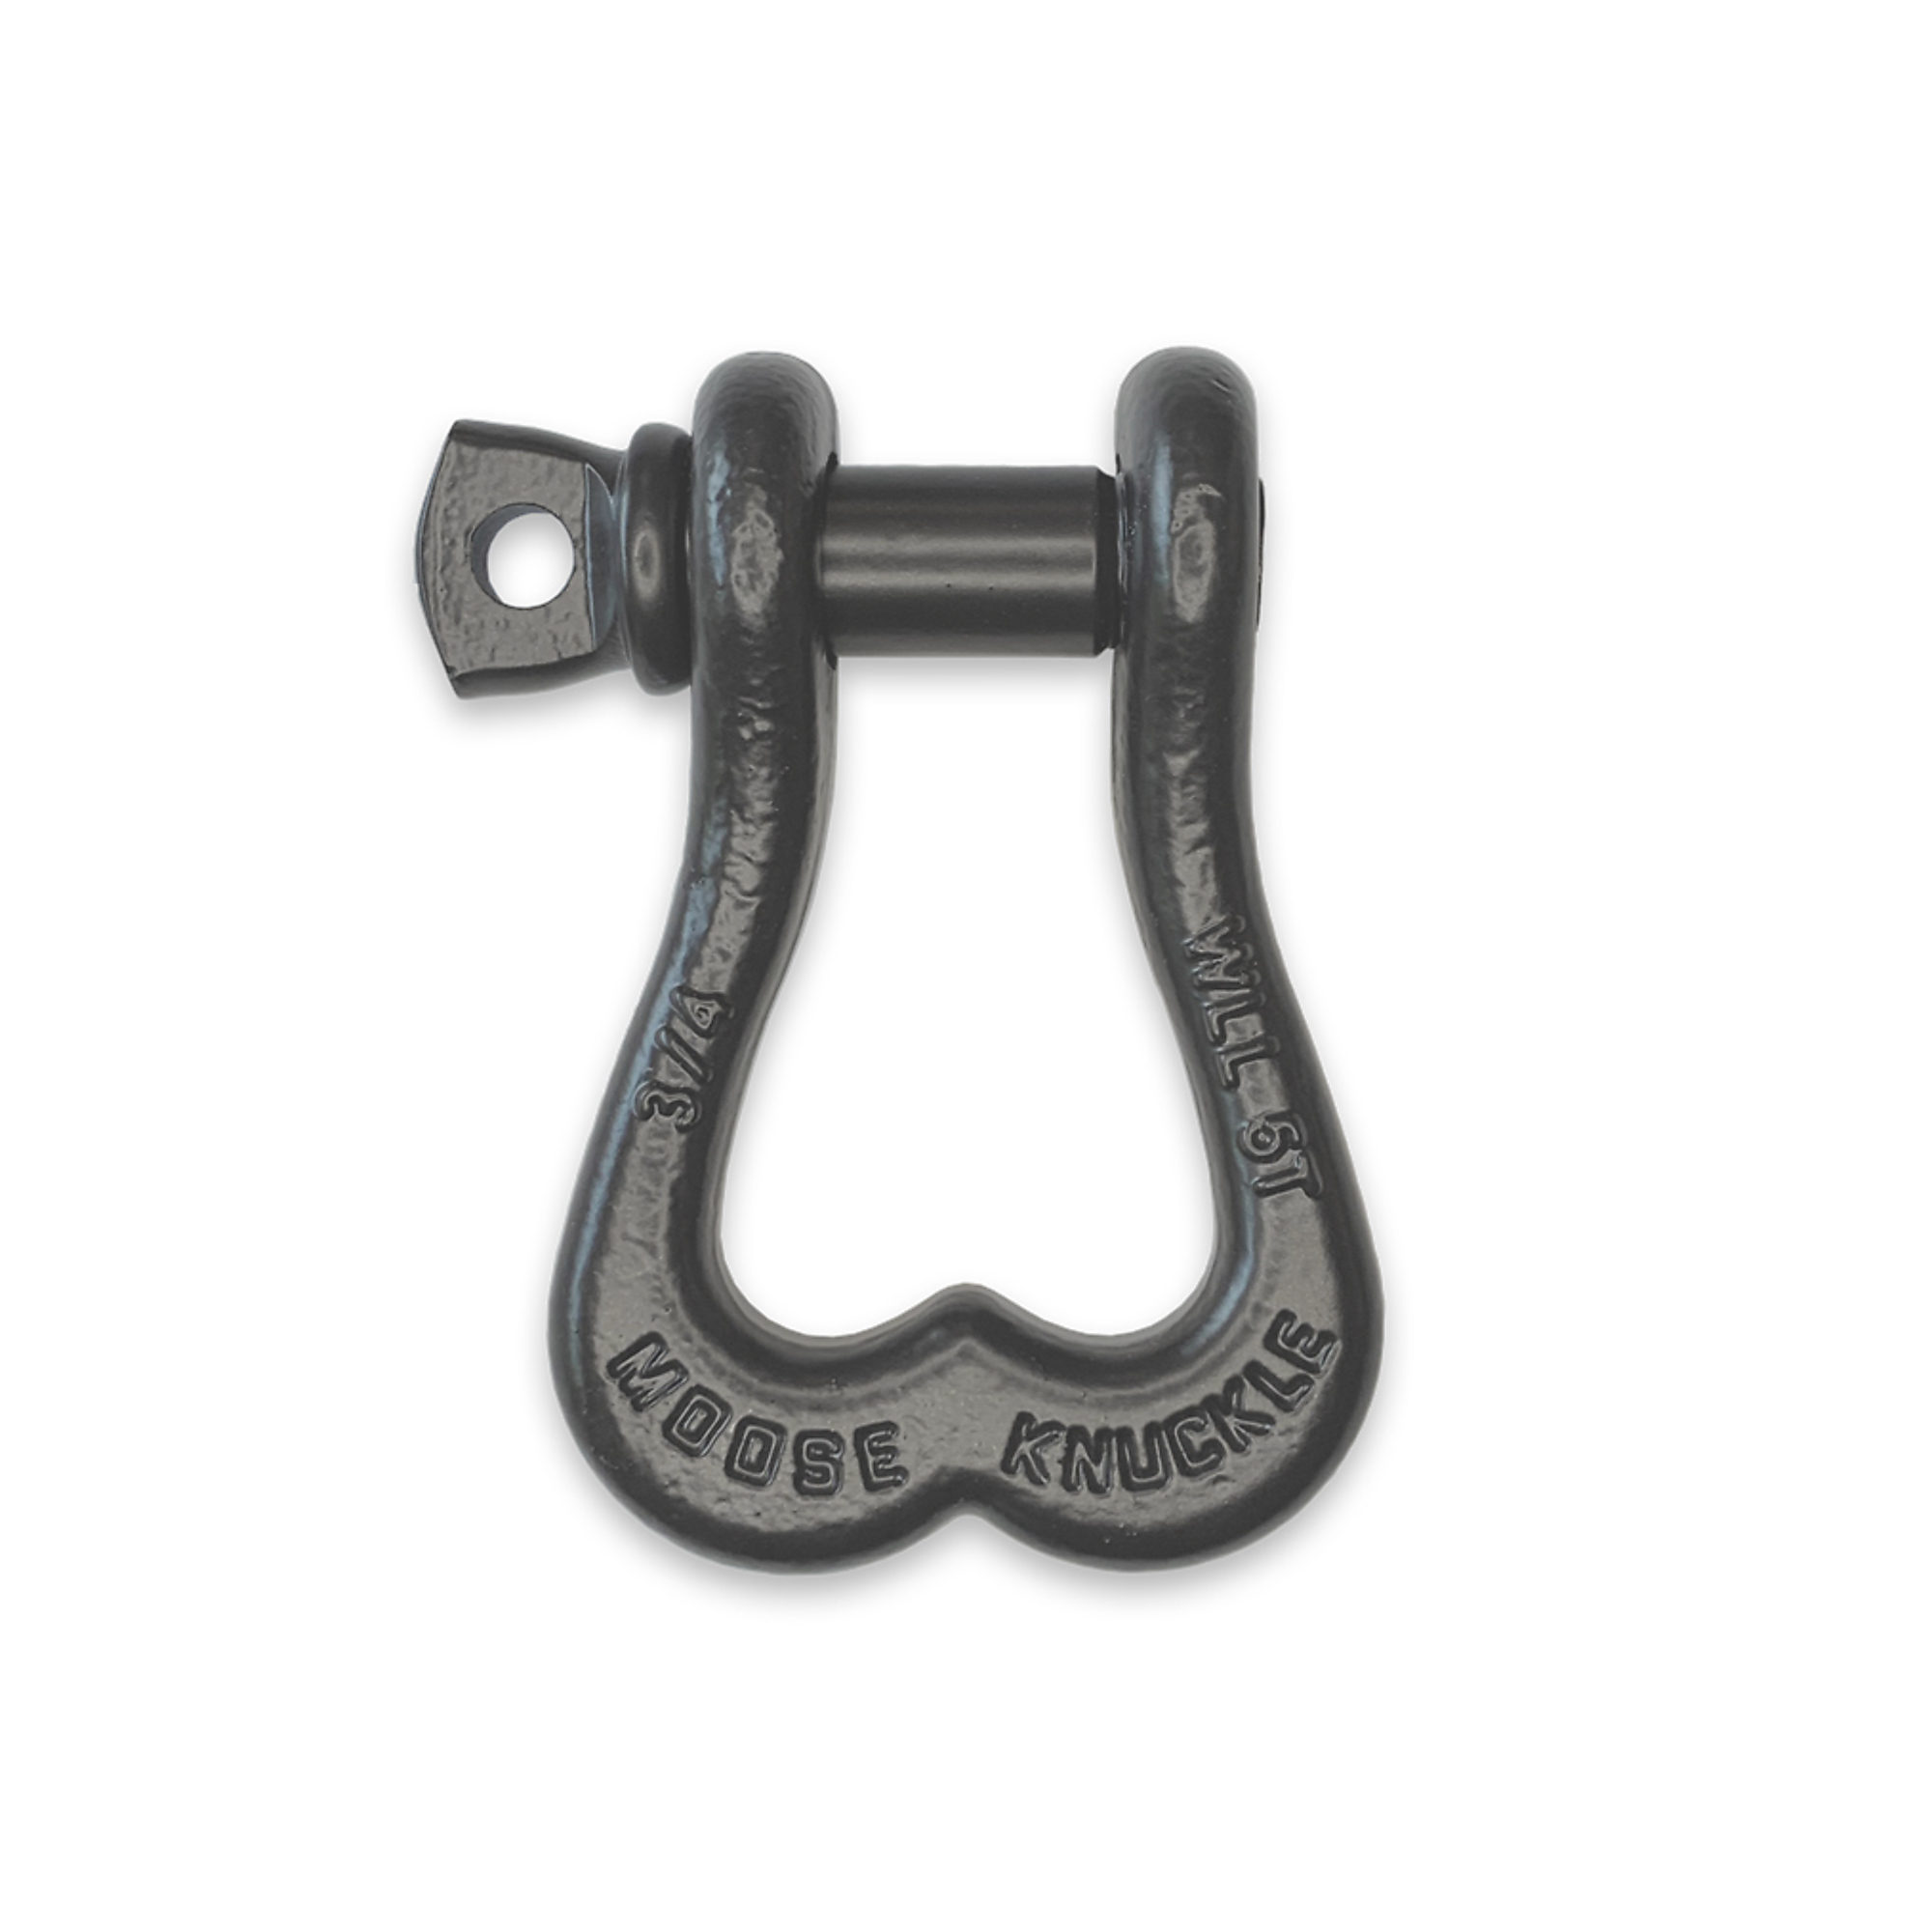 Moose Knuckle Offroad, Gun Gray 3/4Inch Recovery Towing Shackle, Working Load Limit 10000 lb, Model FN000001-002